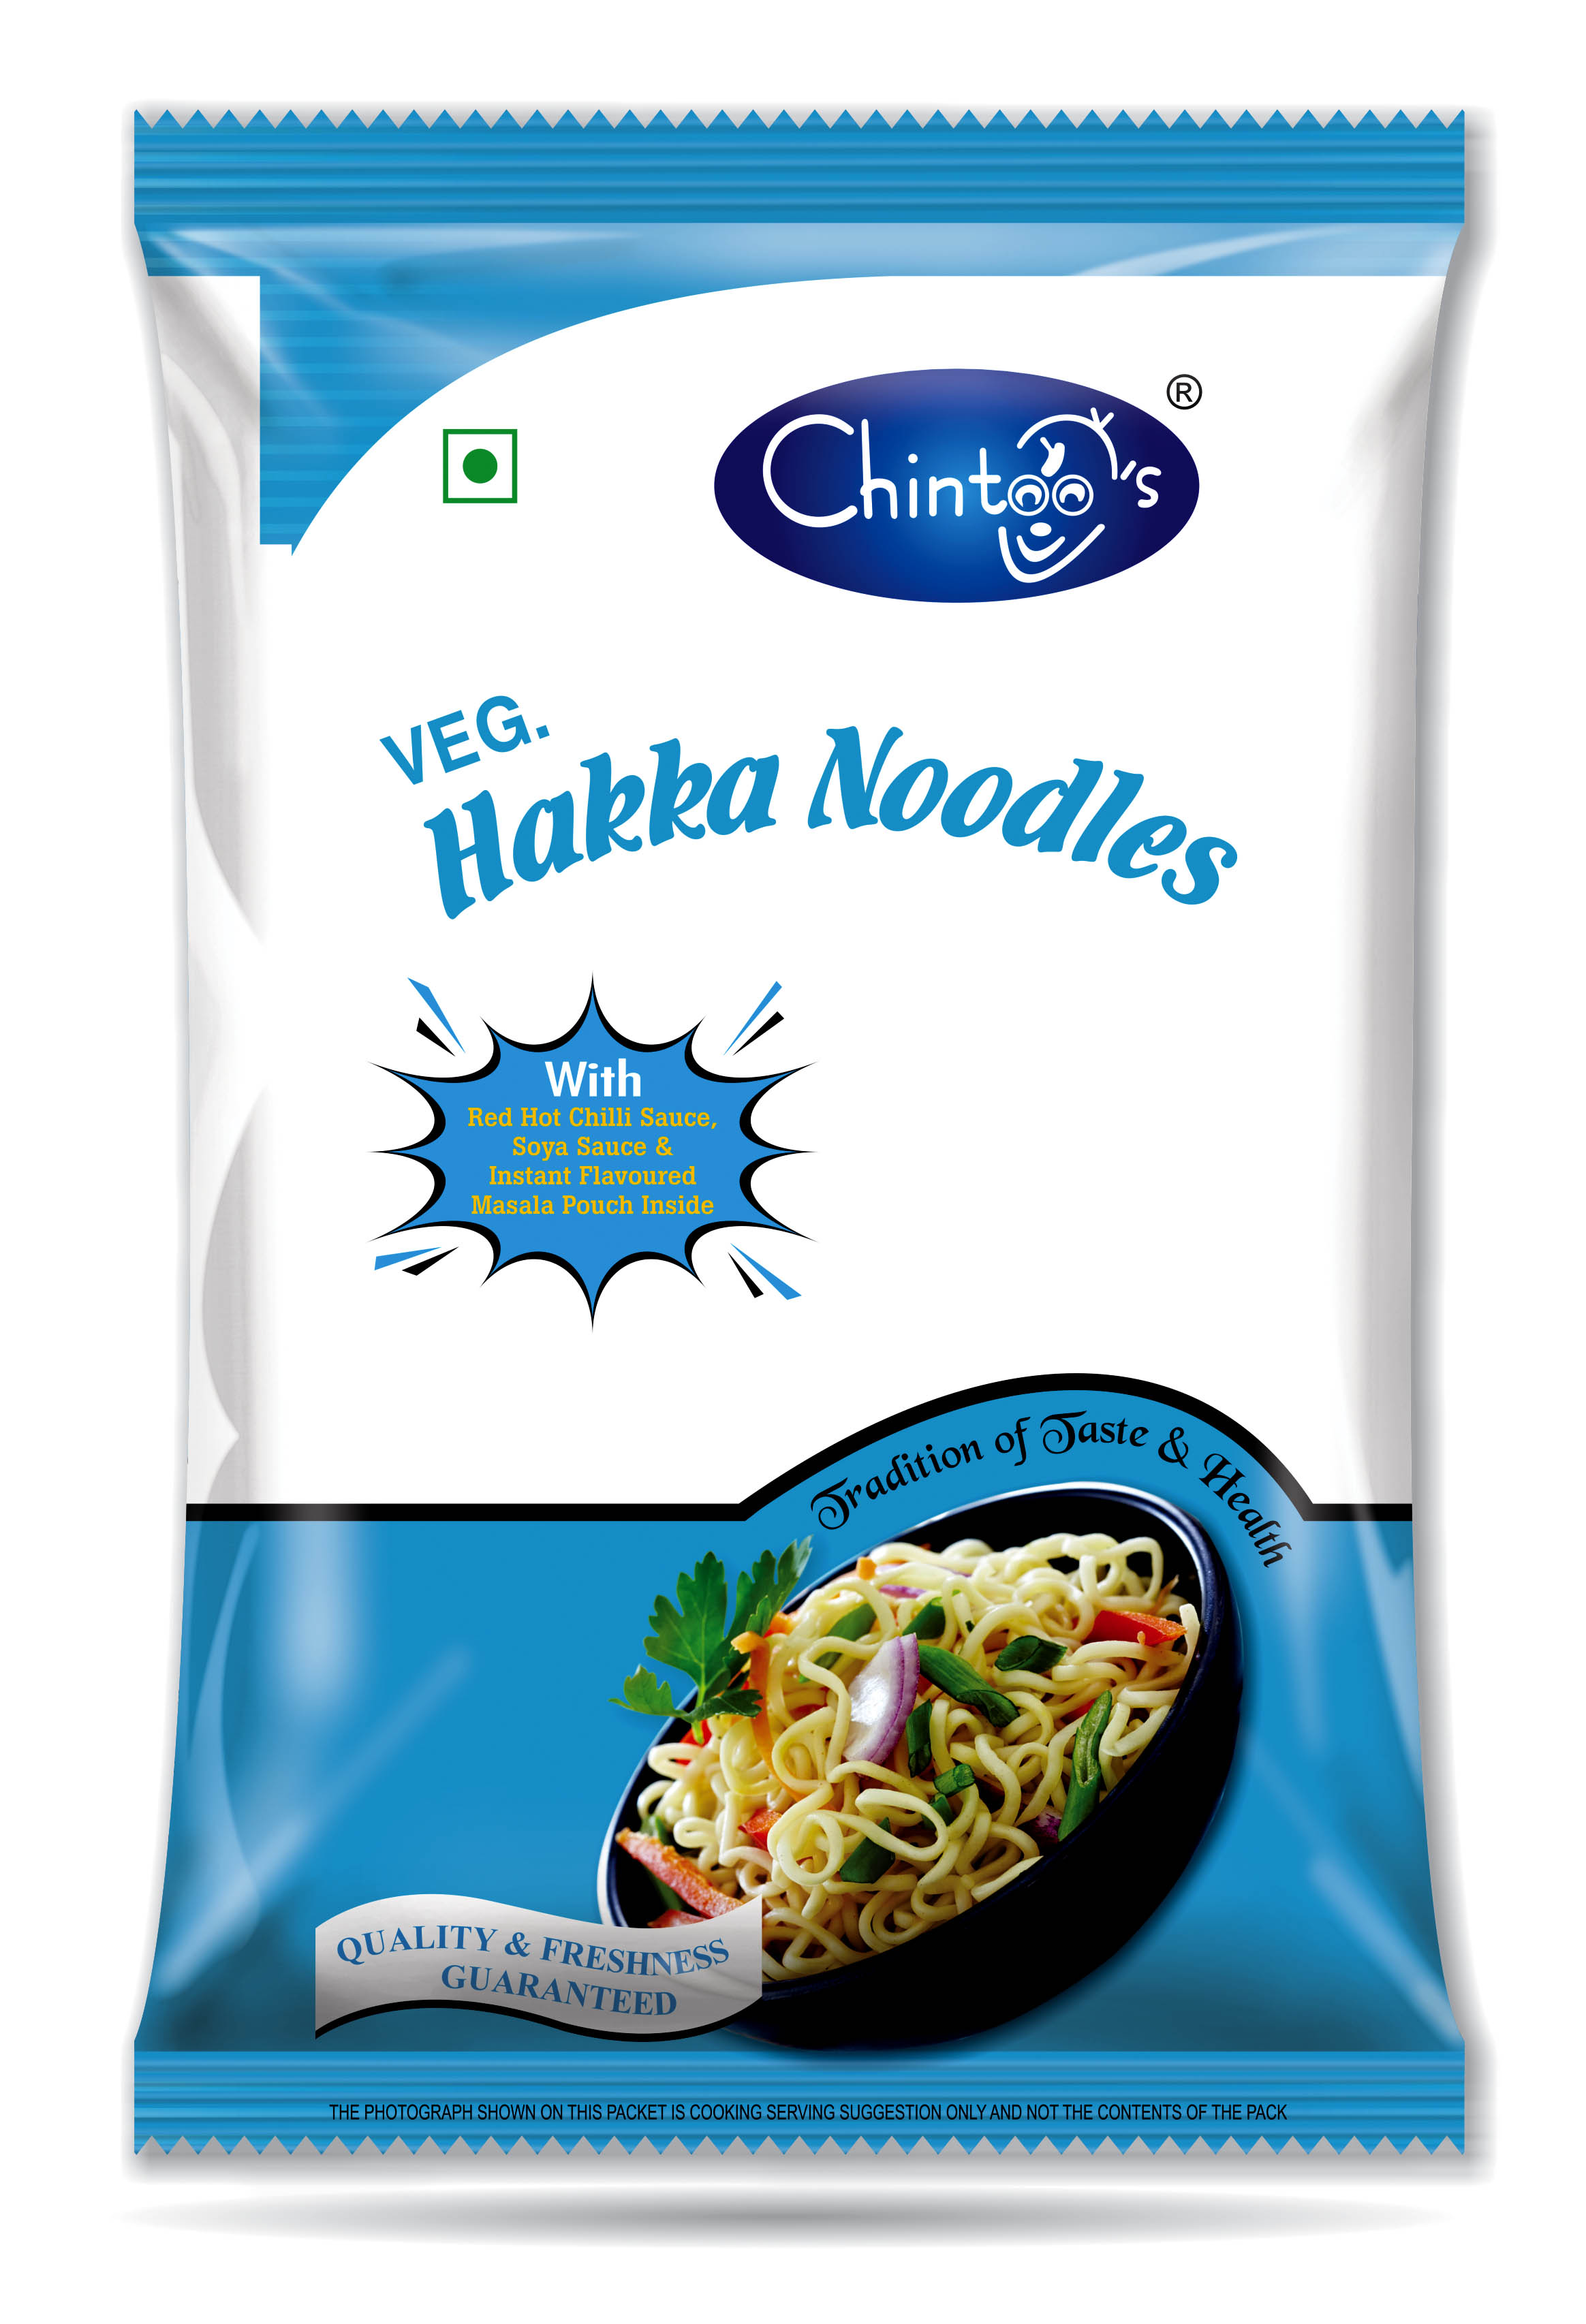 Chintoos Food Products